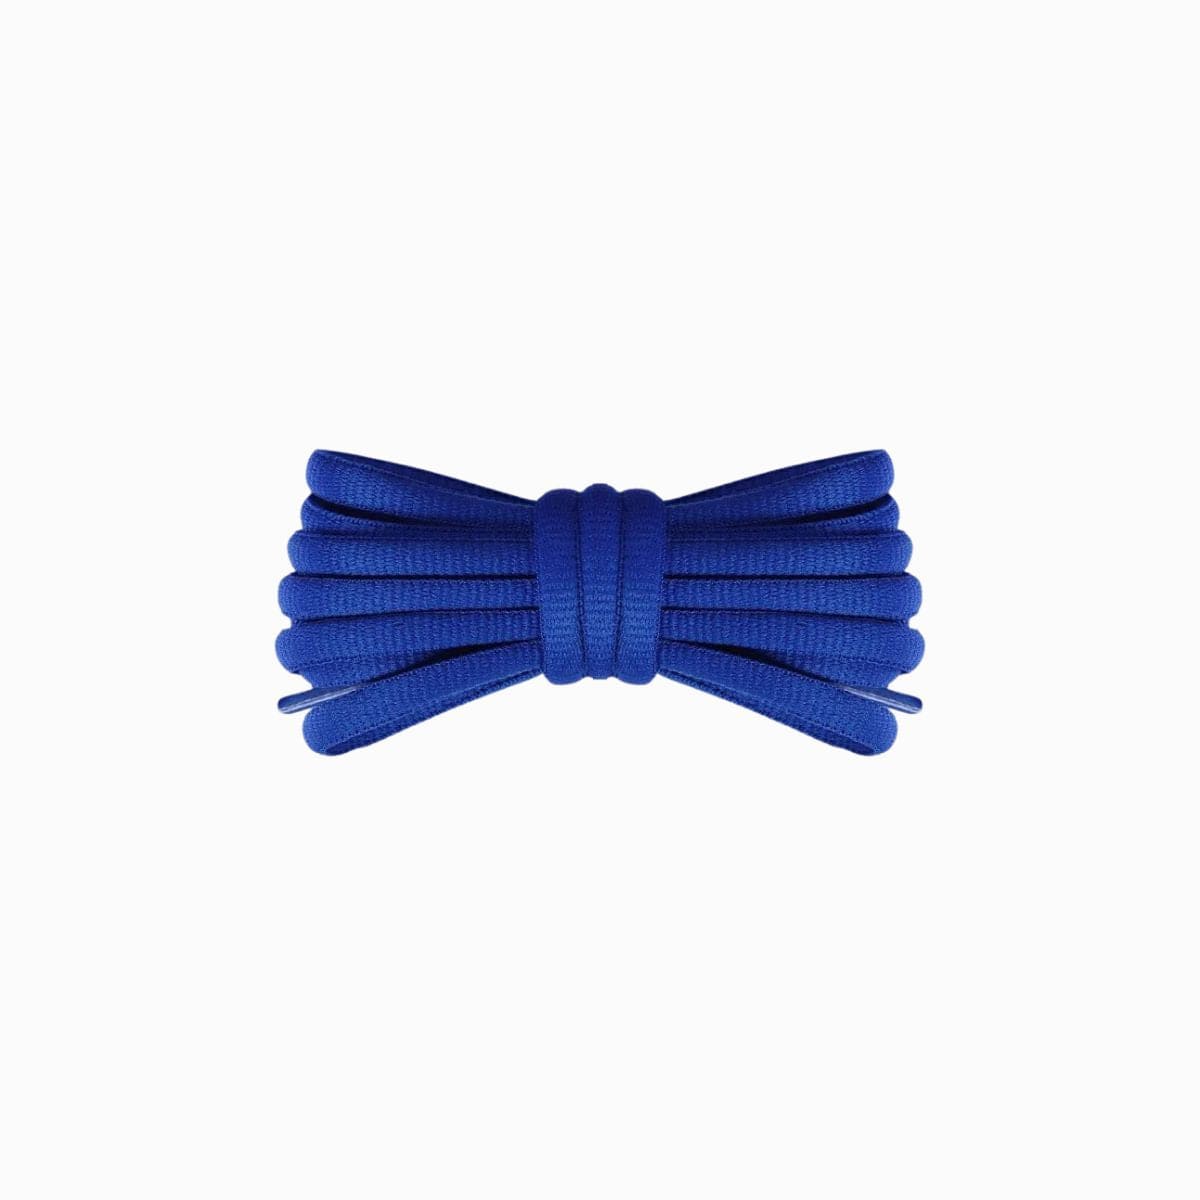 Nike_TN_Replacement_Shoelaces_Royal_Blue